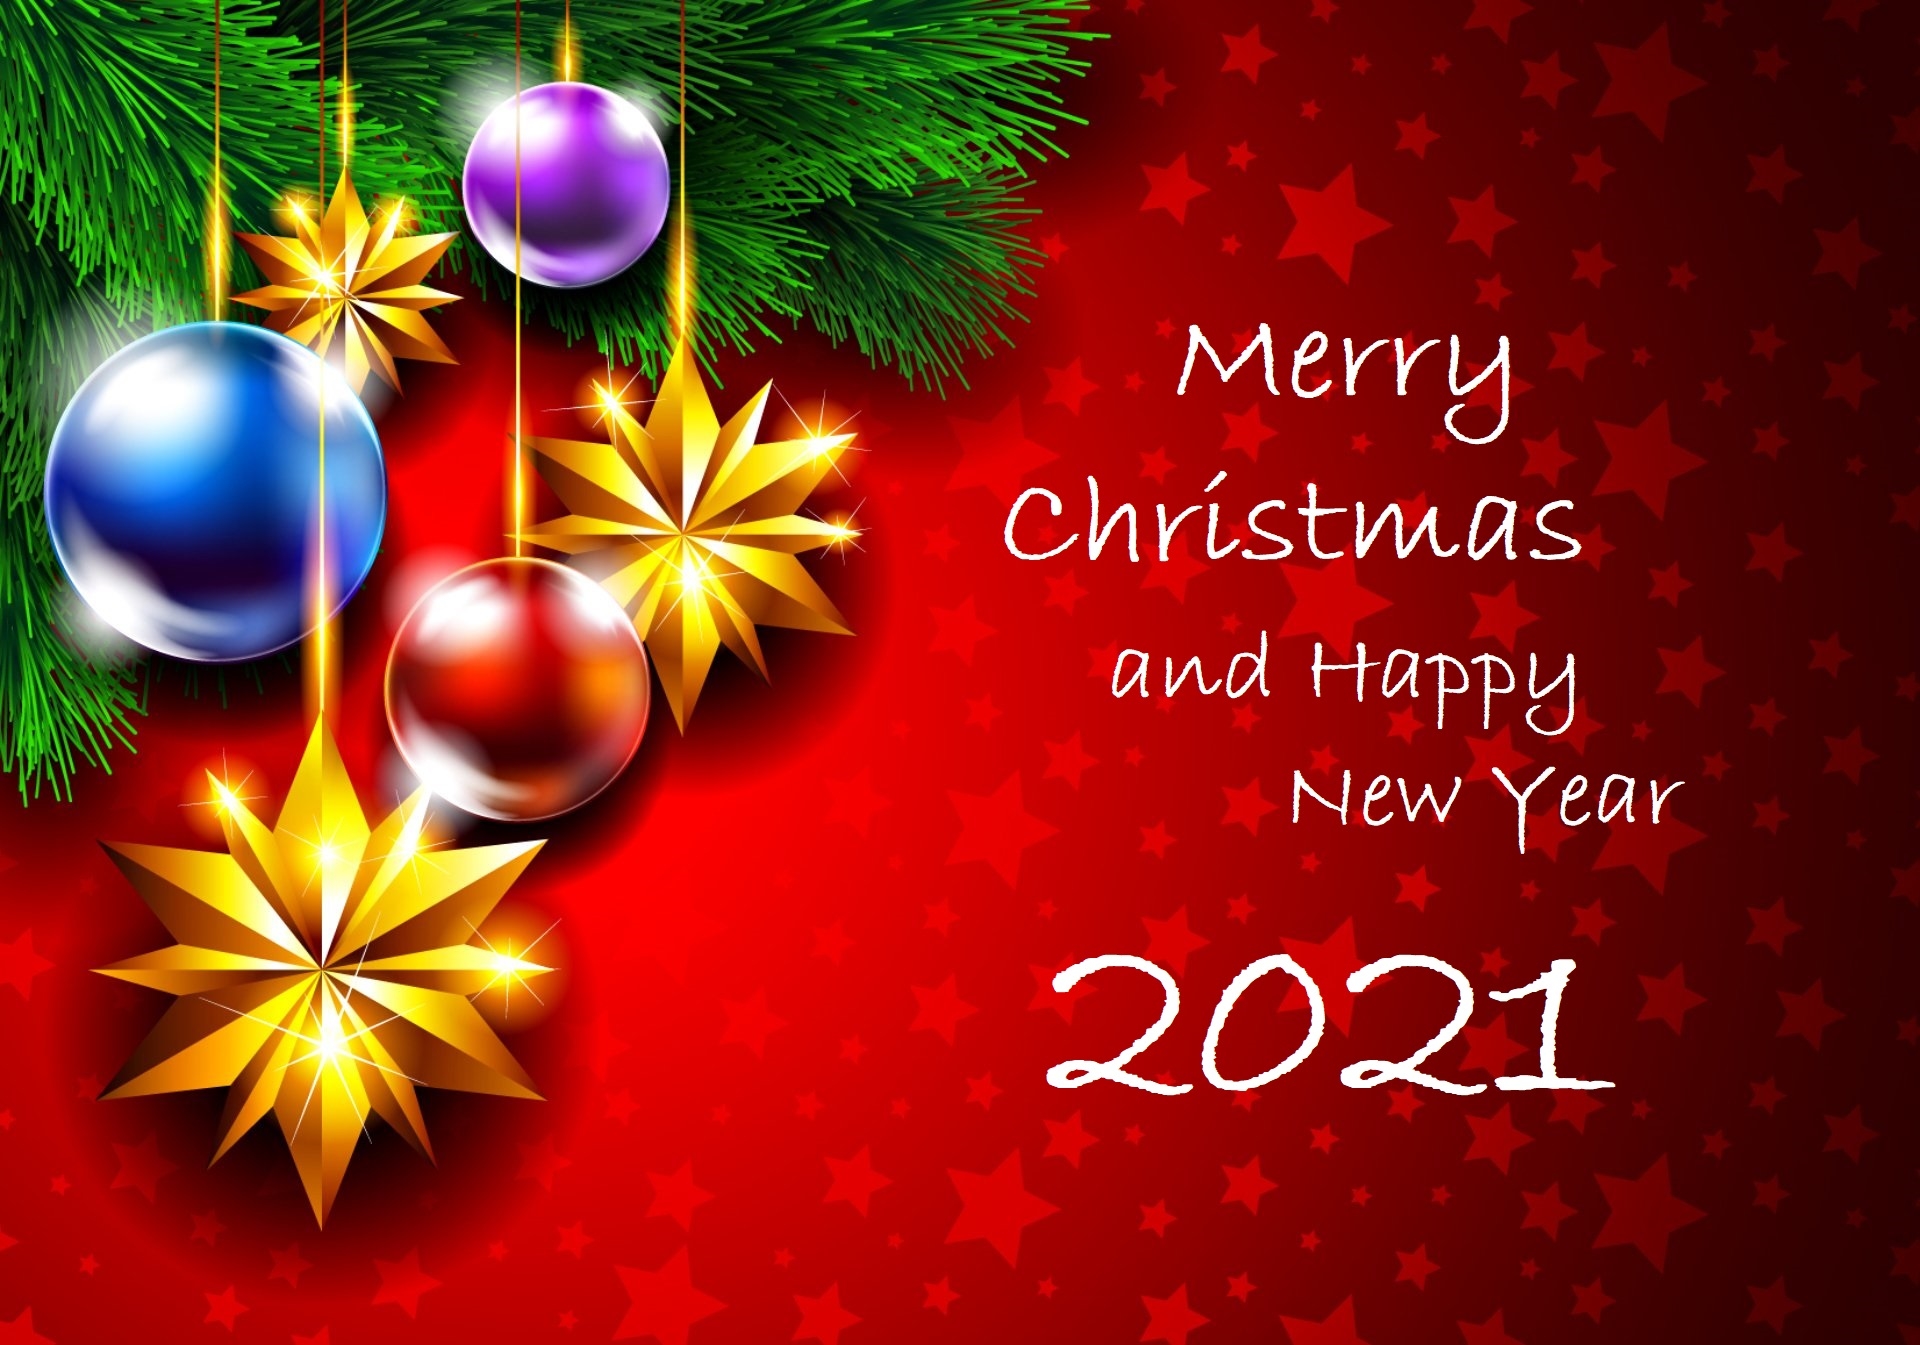 1280x80020 Happy New Year Merry Christmas 2021 Greeting 1280x80020  Resolution Wallpaper, HD Holidays 4K Wallpapers, Images, Photos and  Background - Wallpapers Den